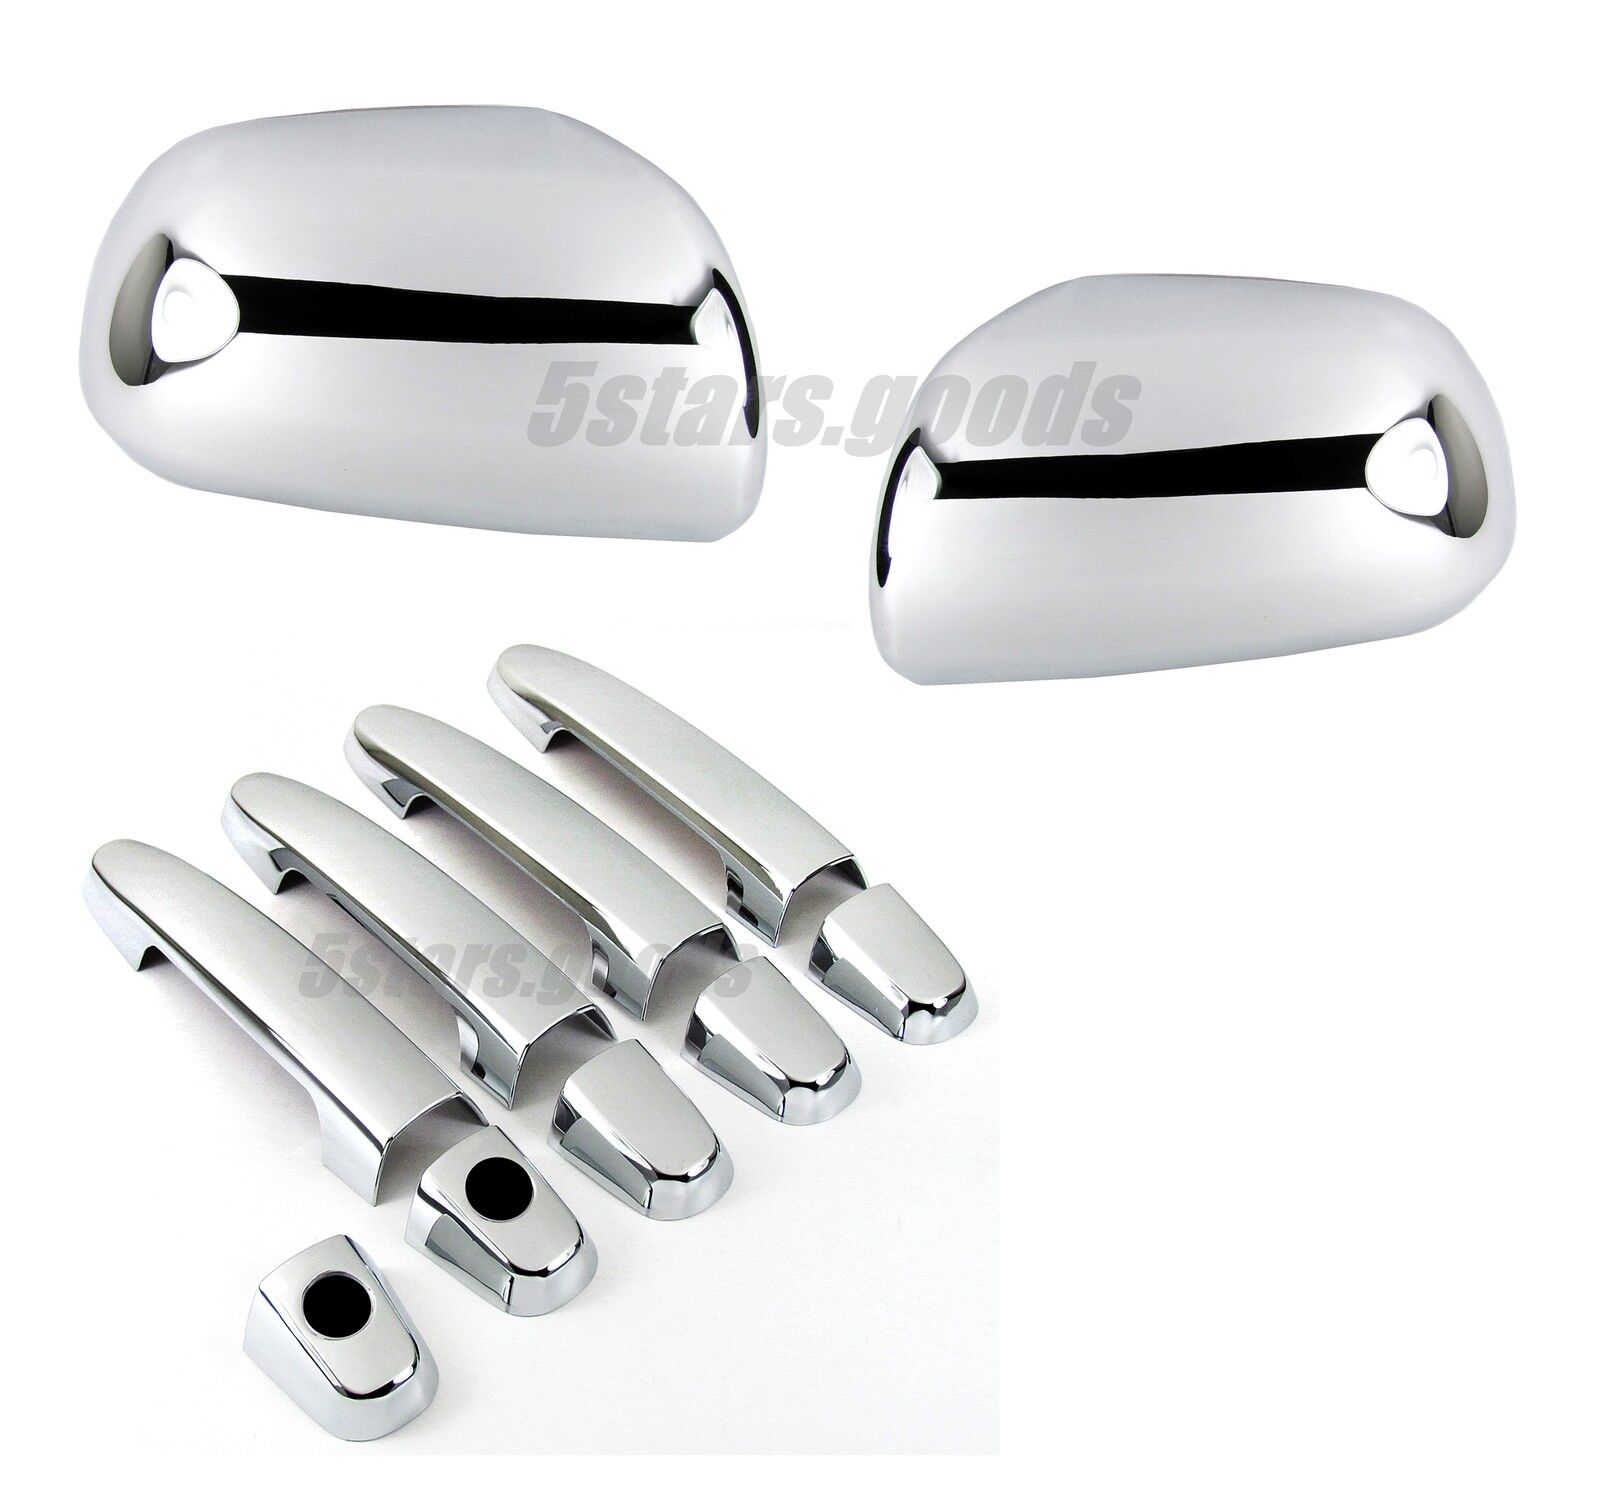 Chrome Side Mirror + Door Handle Covers Trim For Toyota Corolla 2009-2013